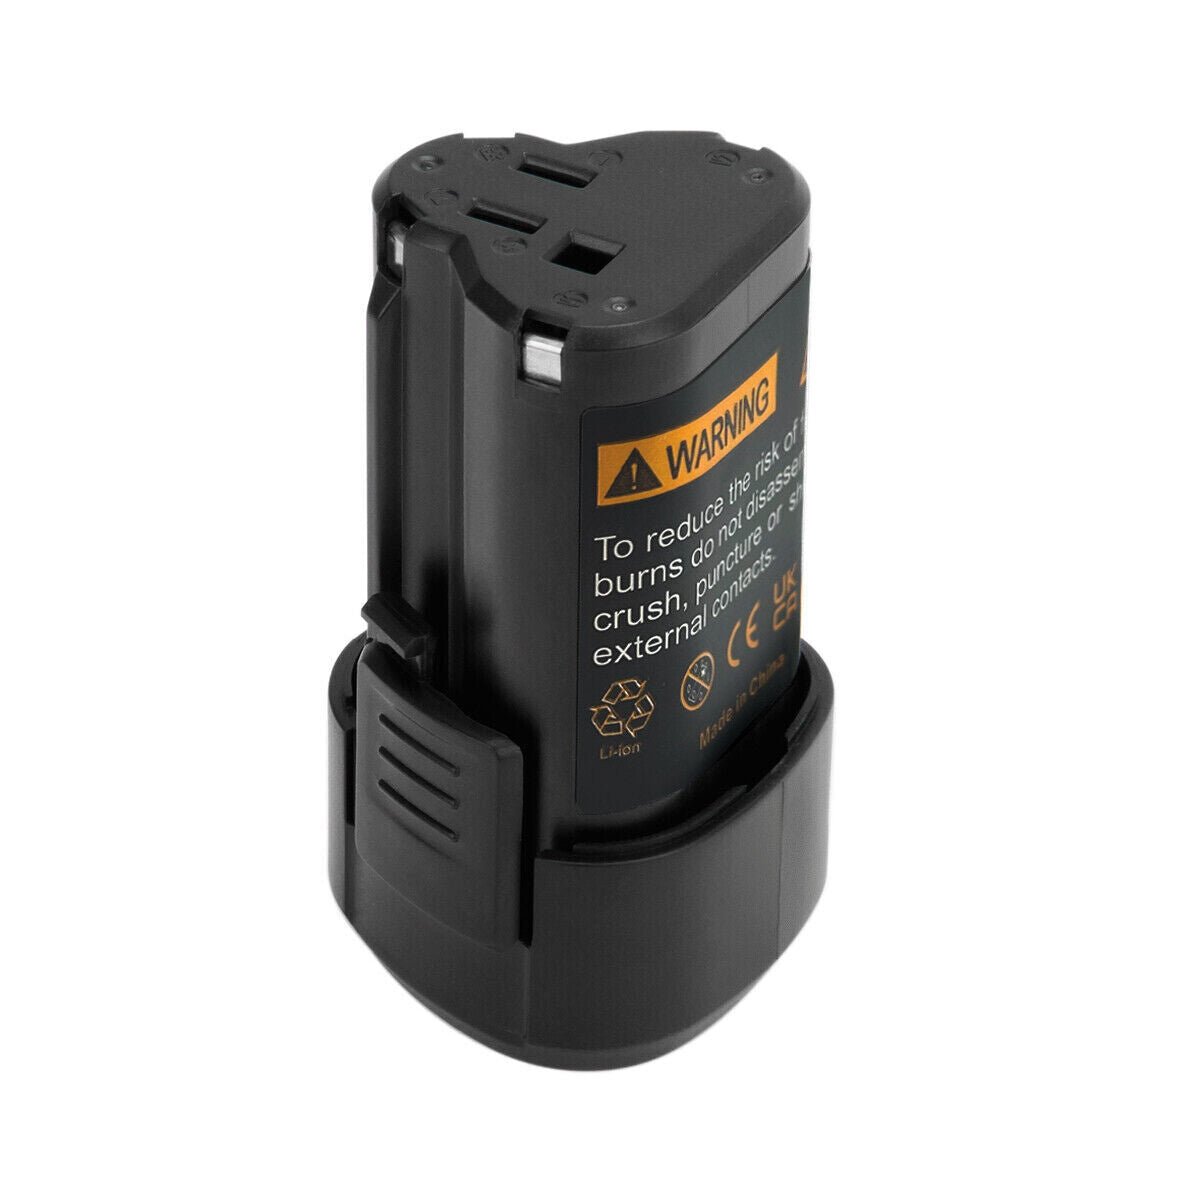 12V 2.0AH Replacement Power Tools battery for Worx WA3503 WA3509 WU288 WX125 WX125.1 - Office Catch